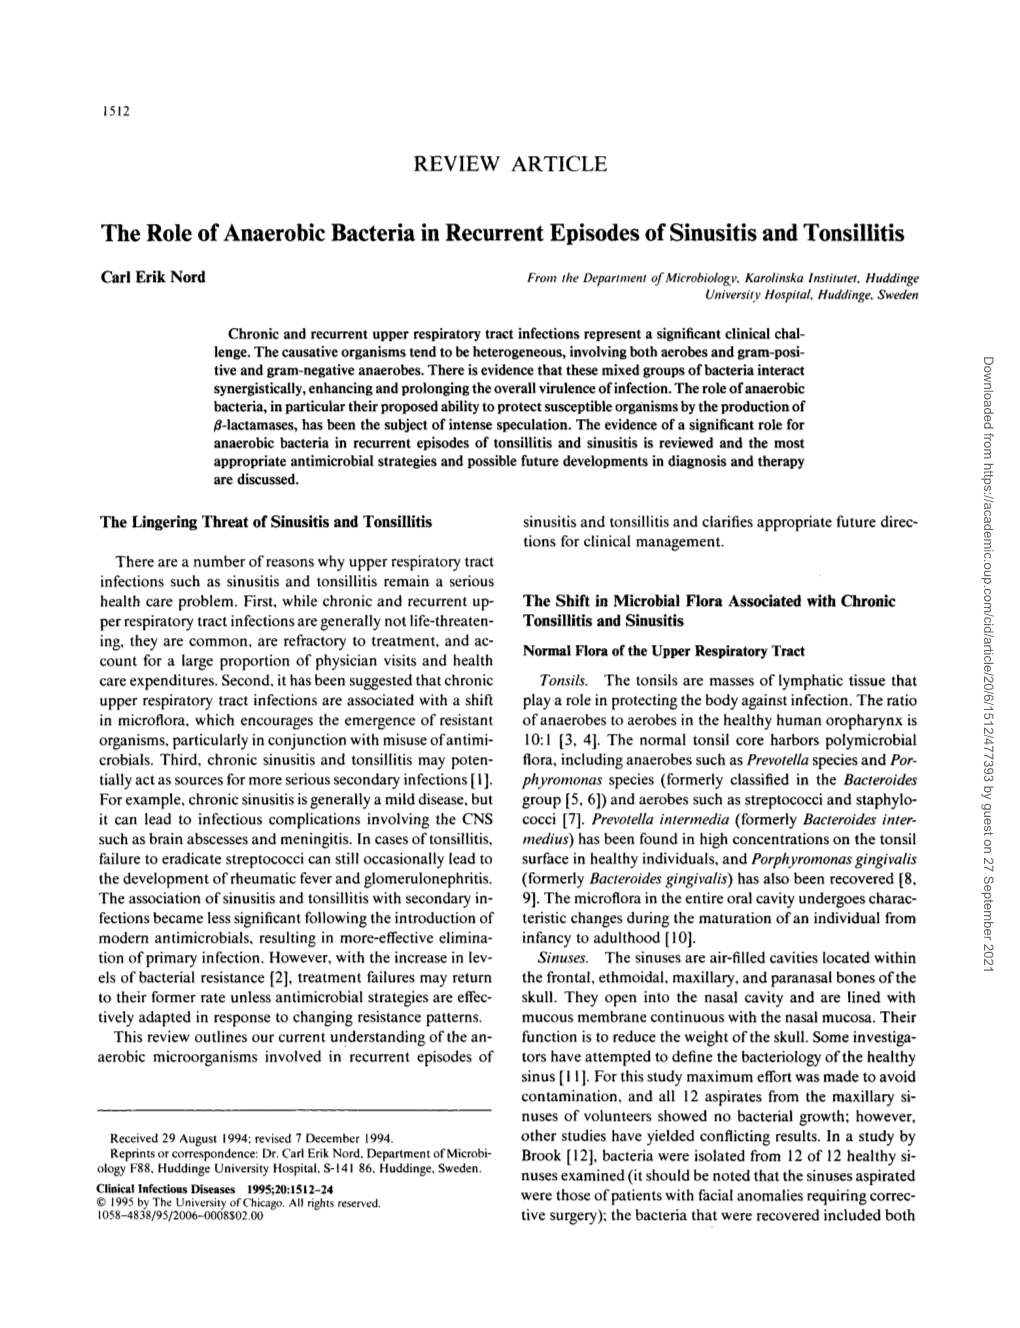 The Role of Anaerobic Bacteria in Recurrent Episodes of Sinusitis and Tonsillitis